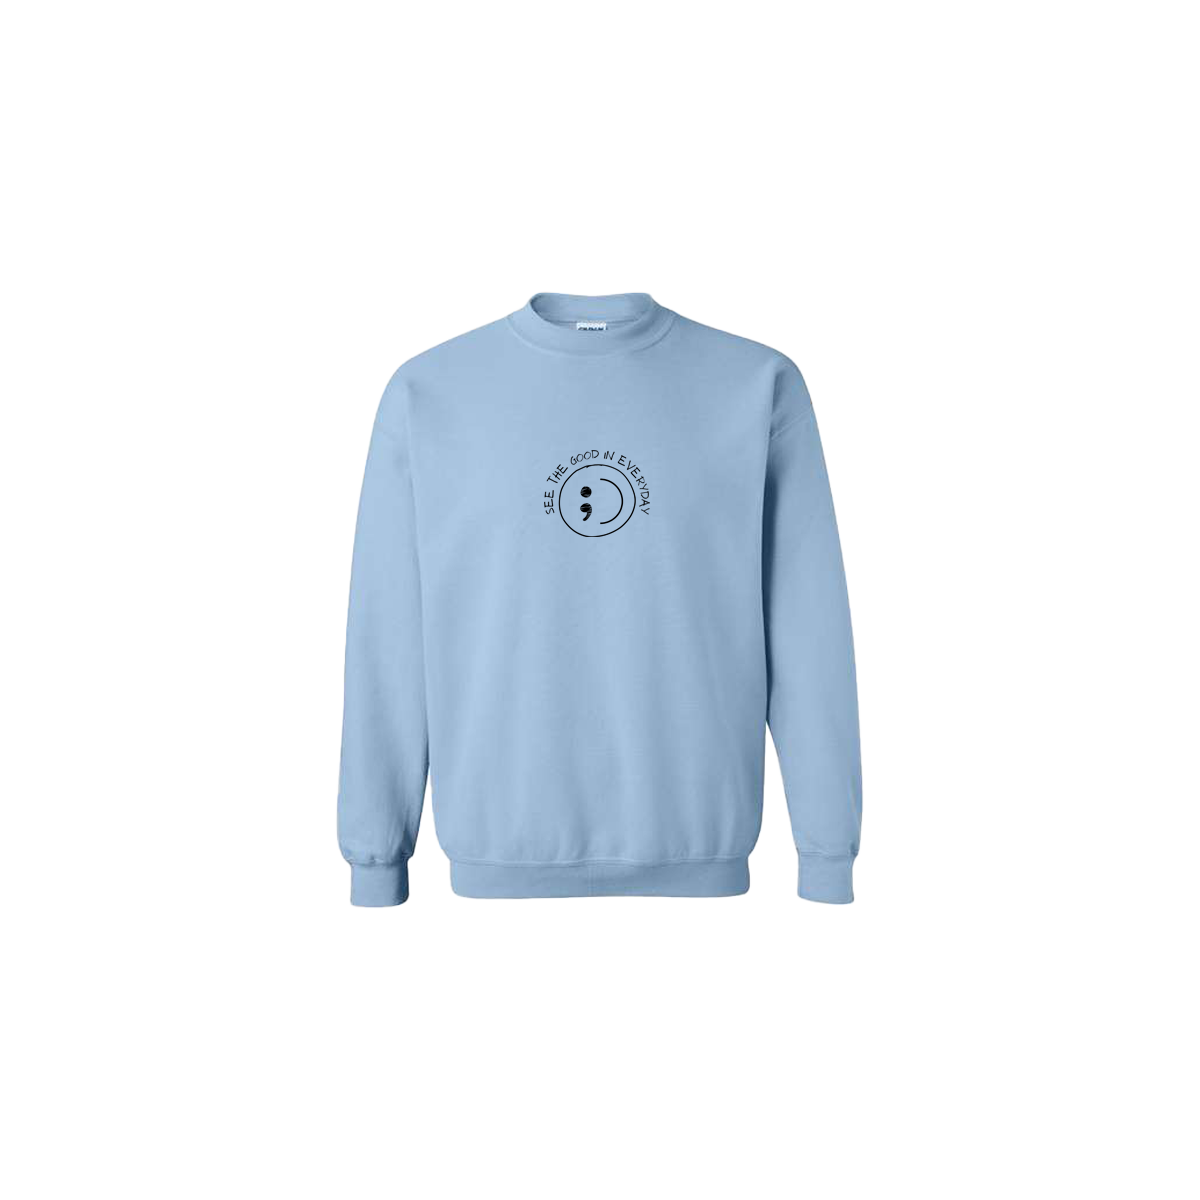 See the Good in Everyday Smiley Embroidered Light Blue Crewneck - Mental Health Awareness Clothing